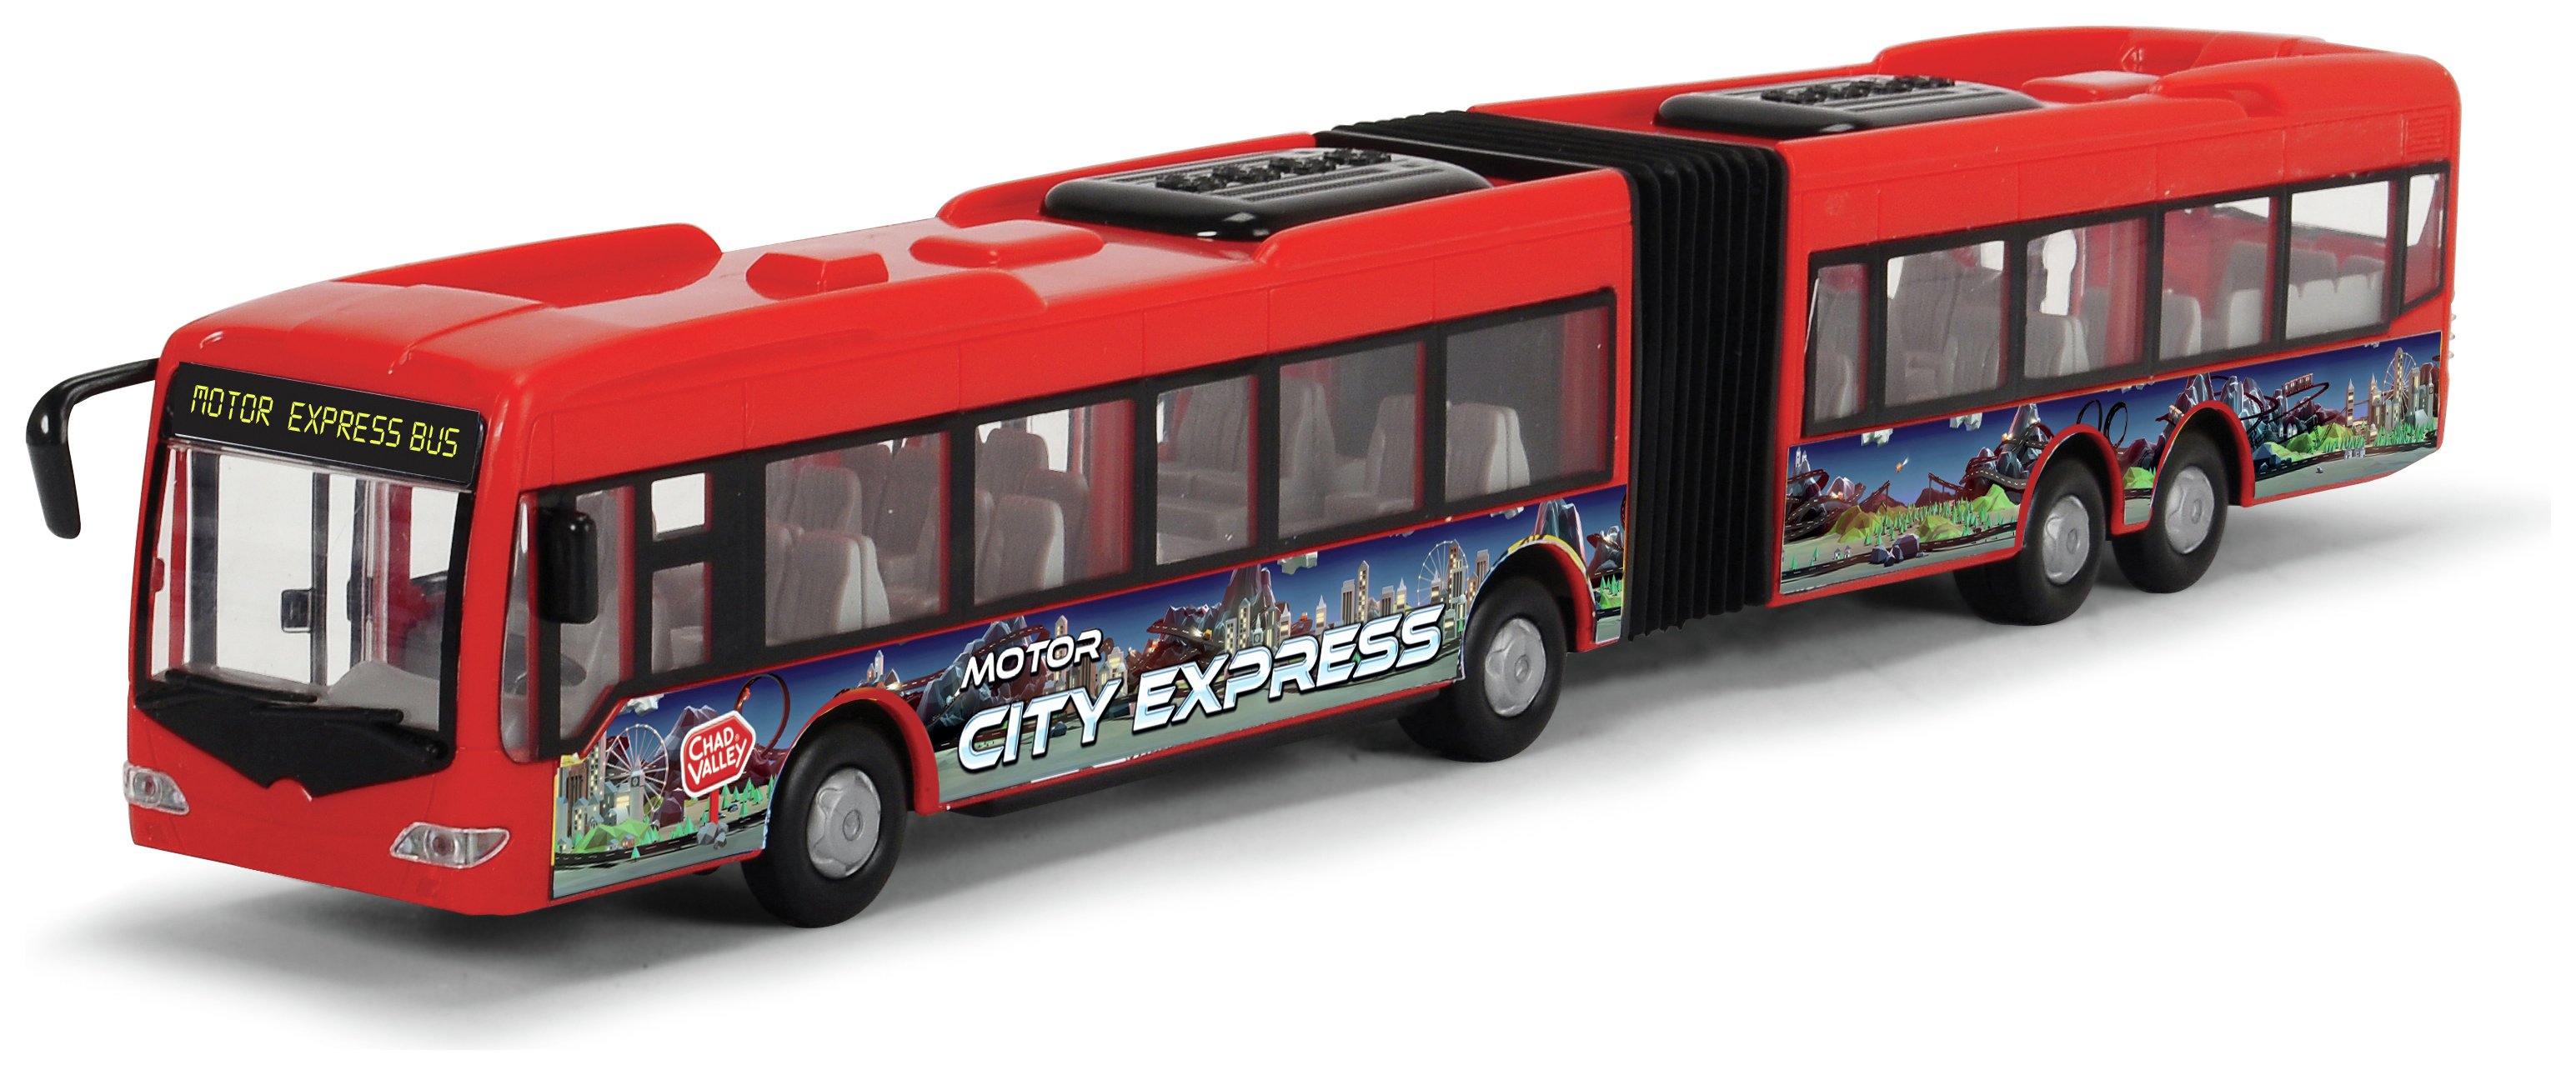 chad valley express bus